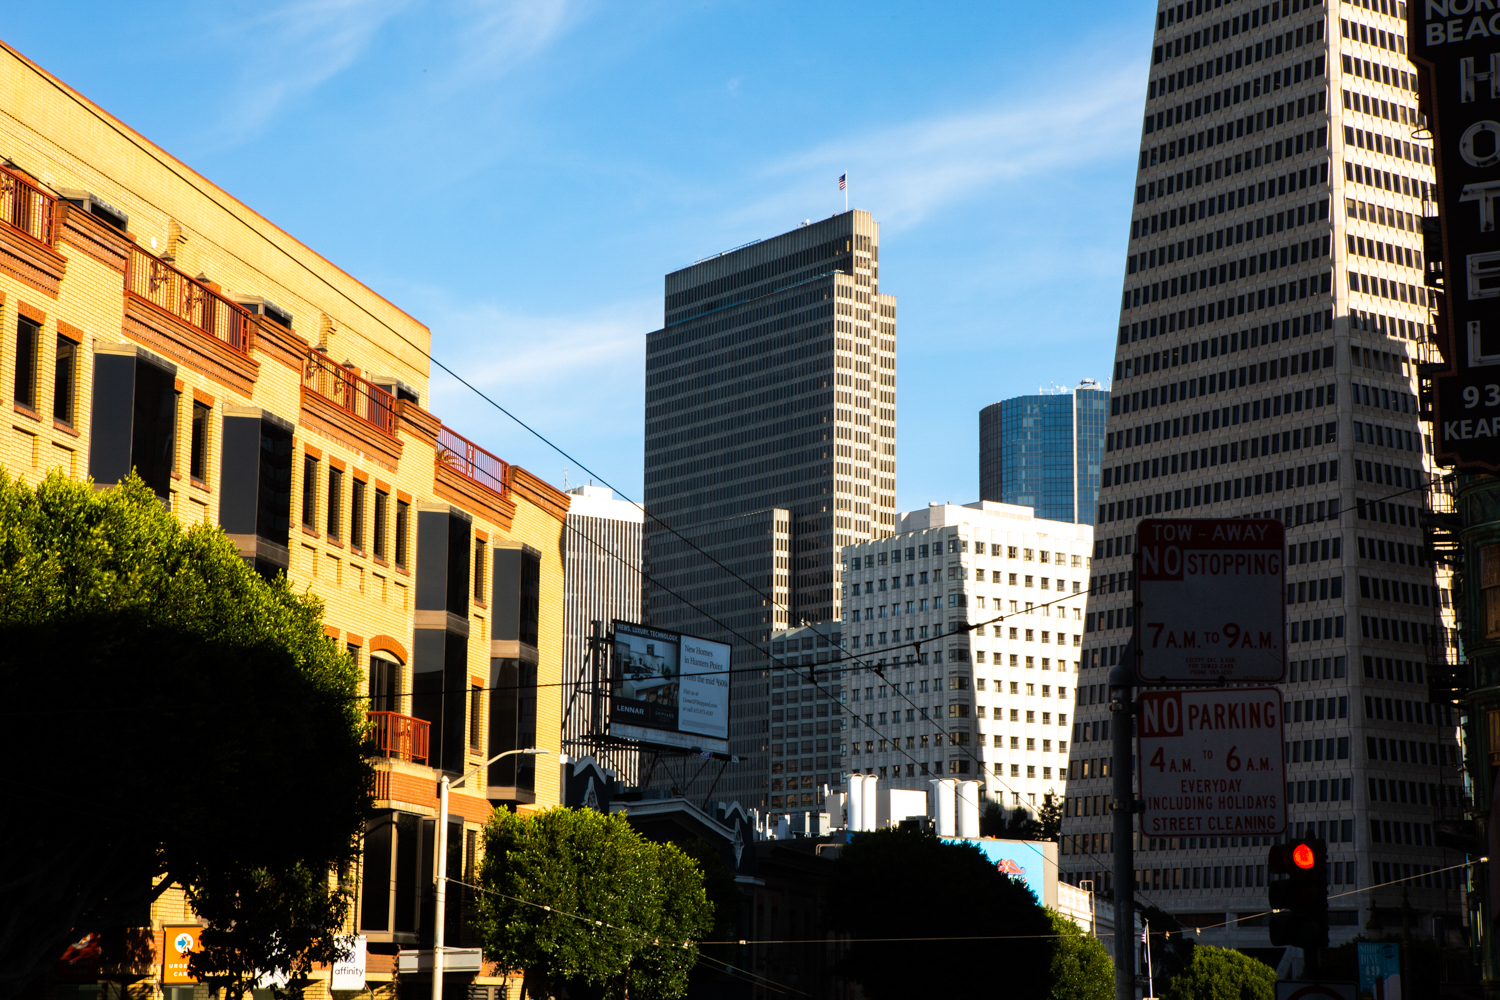 One Embarcadero Center seen beside the Transamerica Pyramid, image by Andrew Campbell Nelson